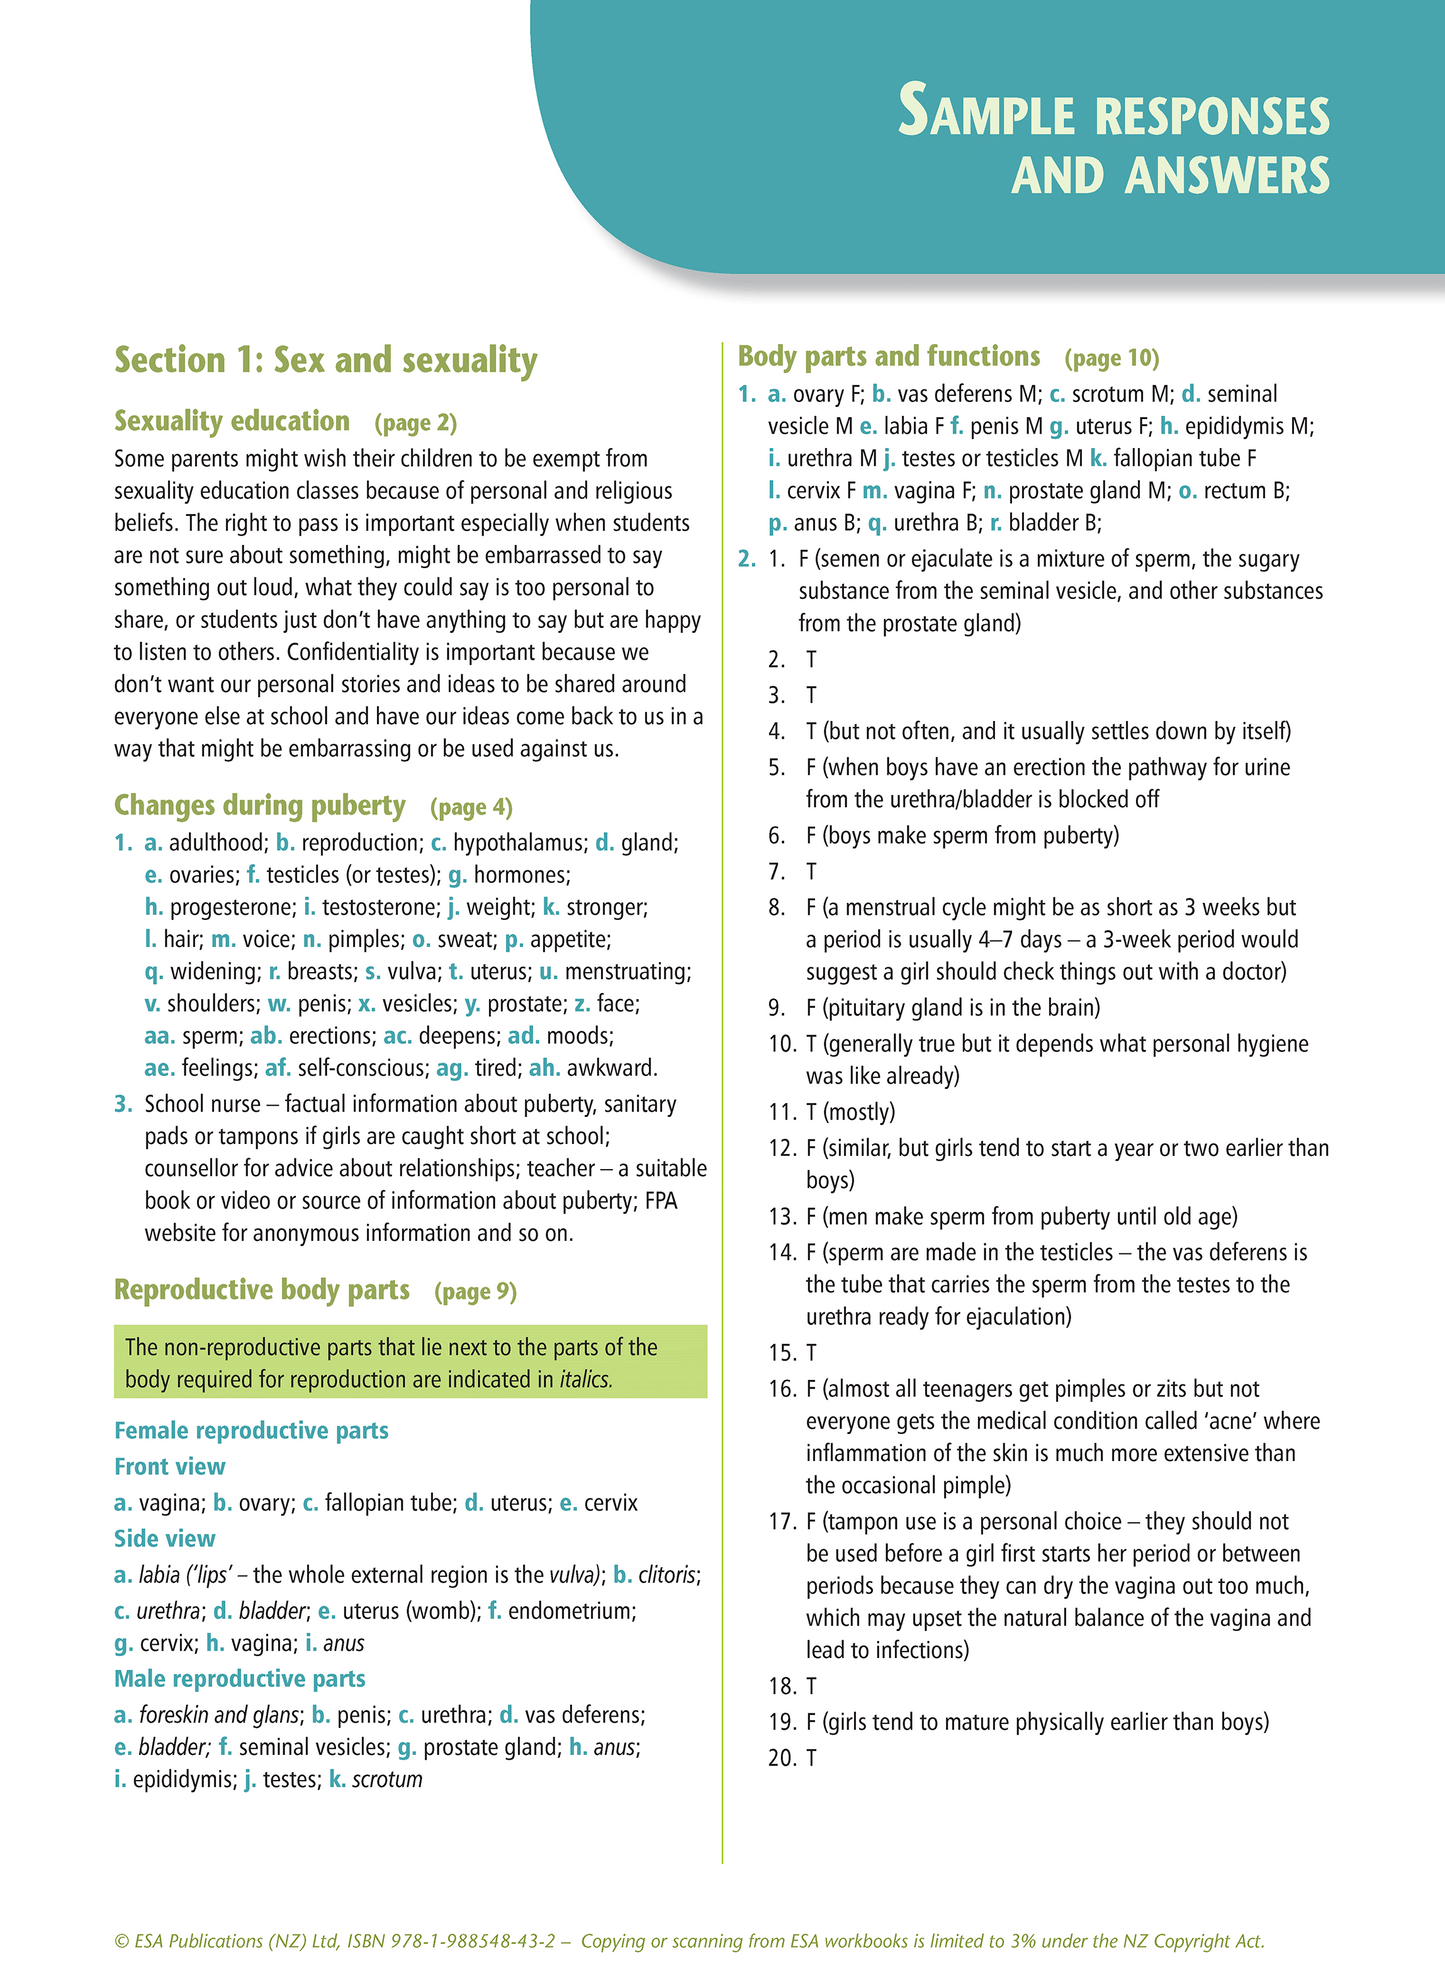 Level 5 Sexuality and Gender Learning Workbook